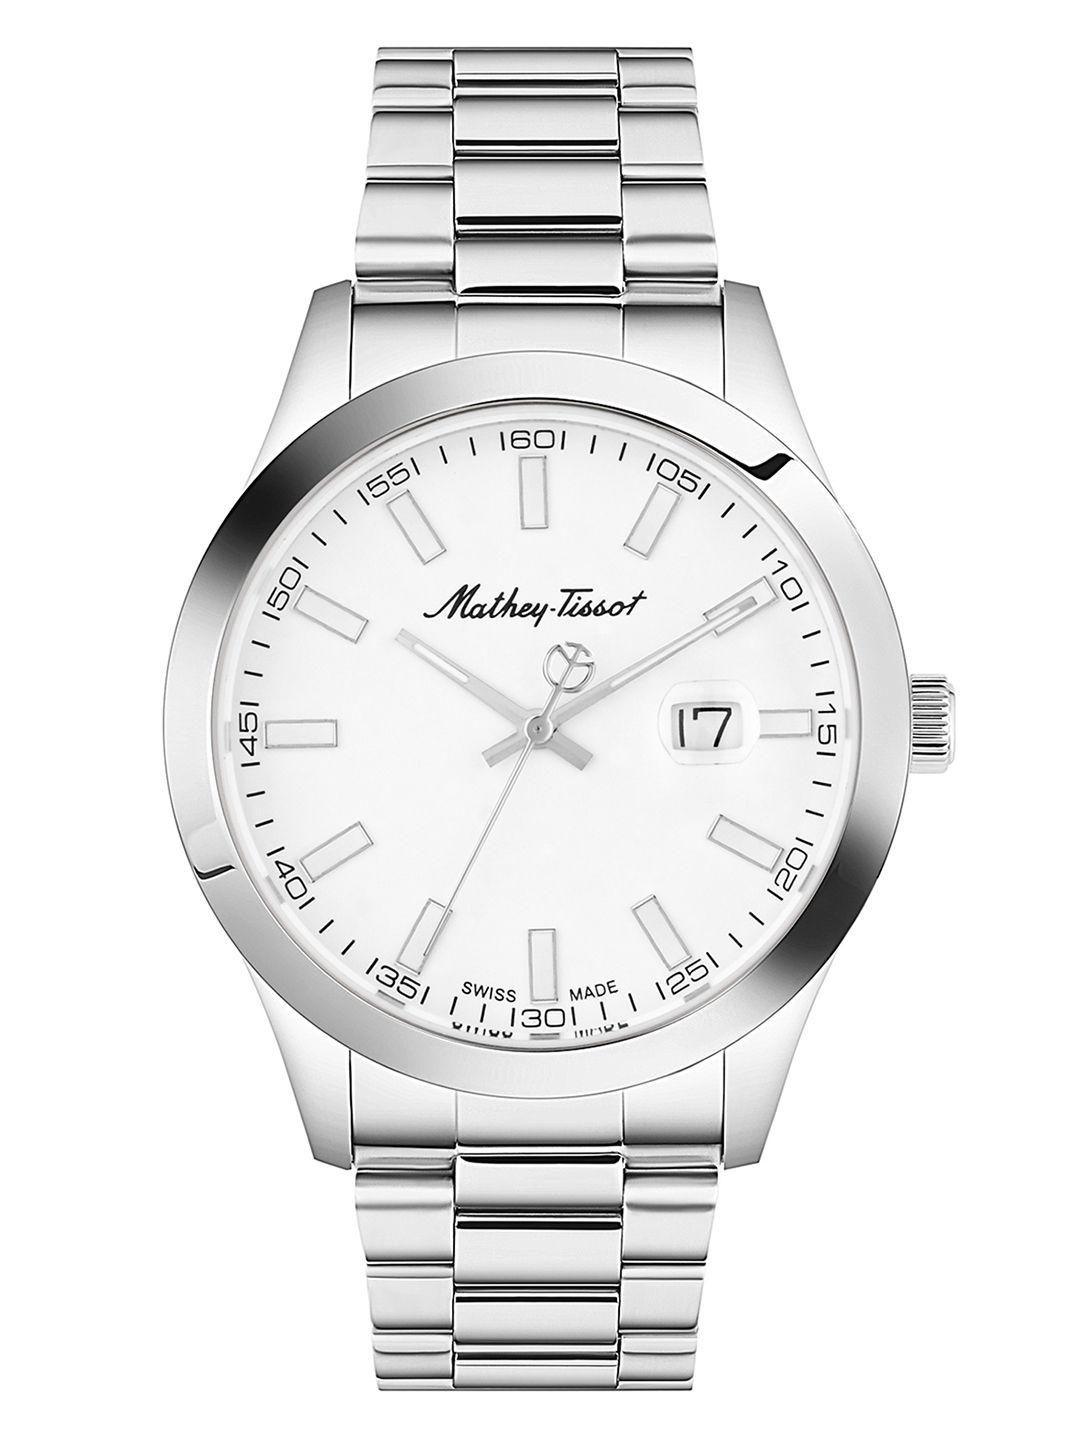 mathey-tissot swiss made men rolly i white dial watch h450ai